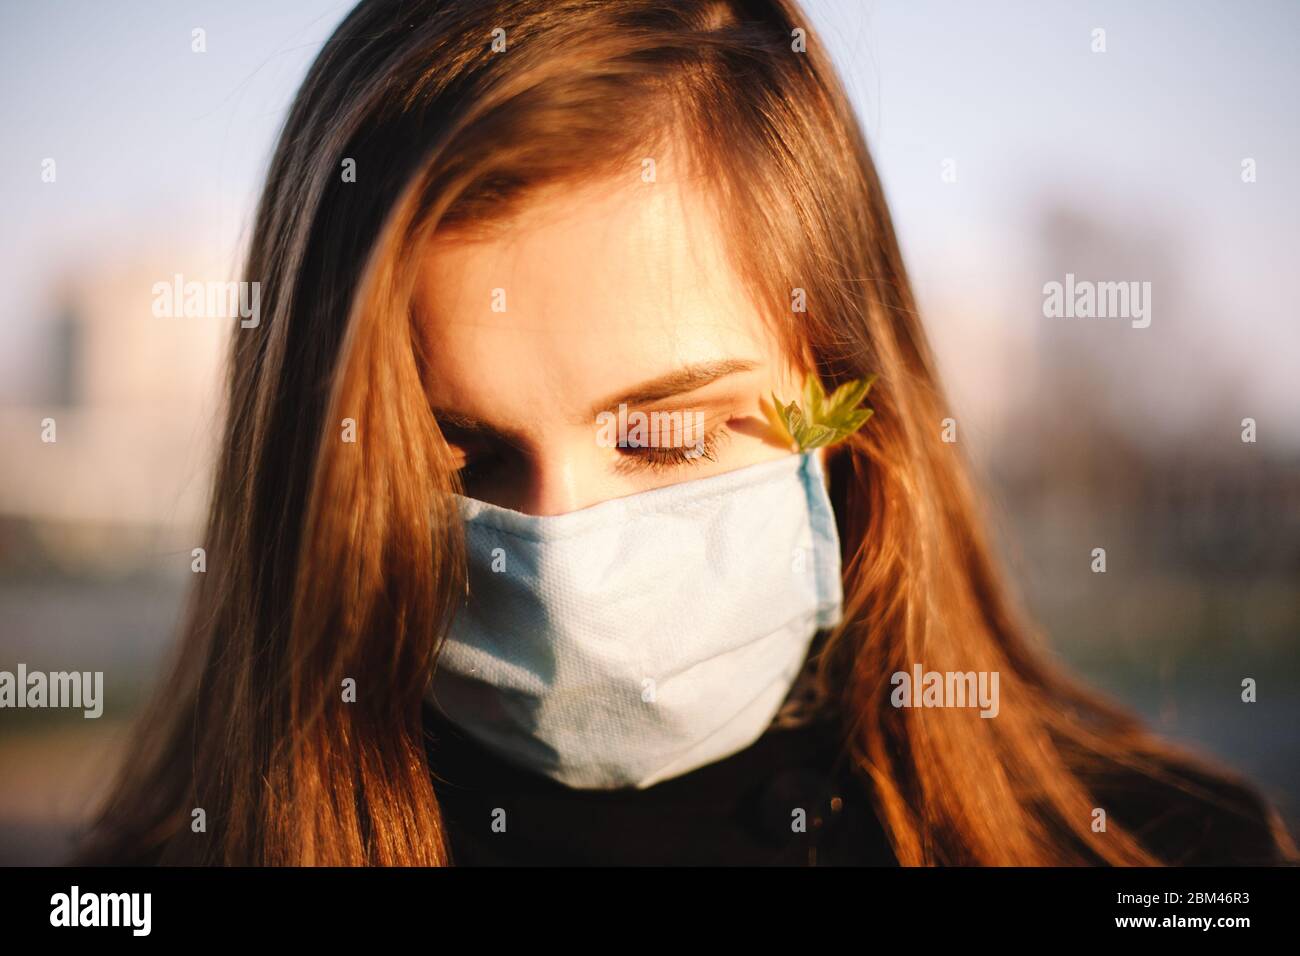 Close up portrait of sad teenage girl wearing protective face medical mask standing outdoors on city street Stock Photo